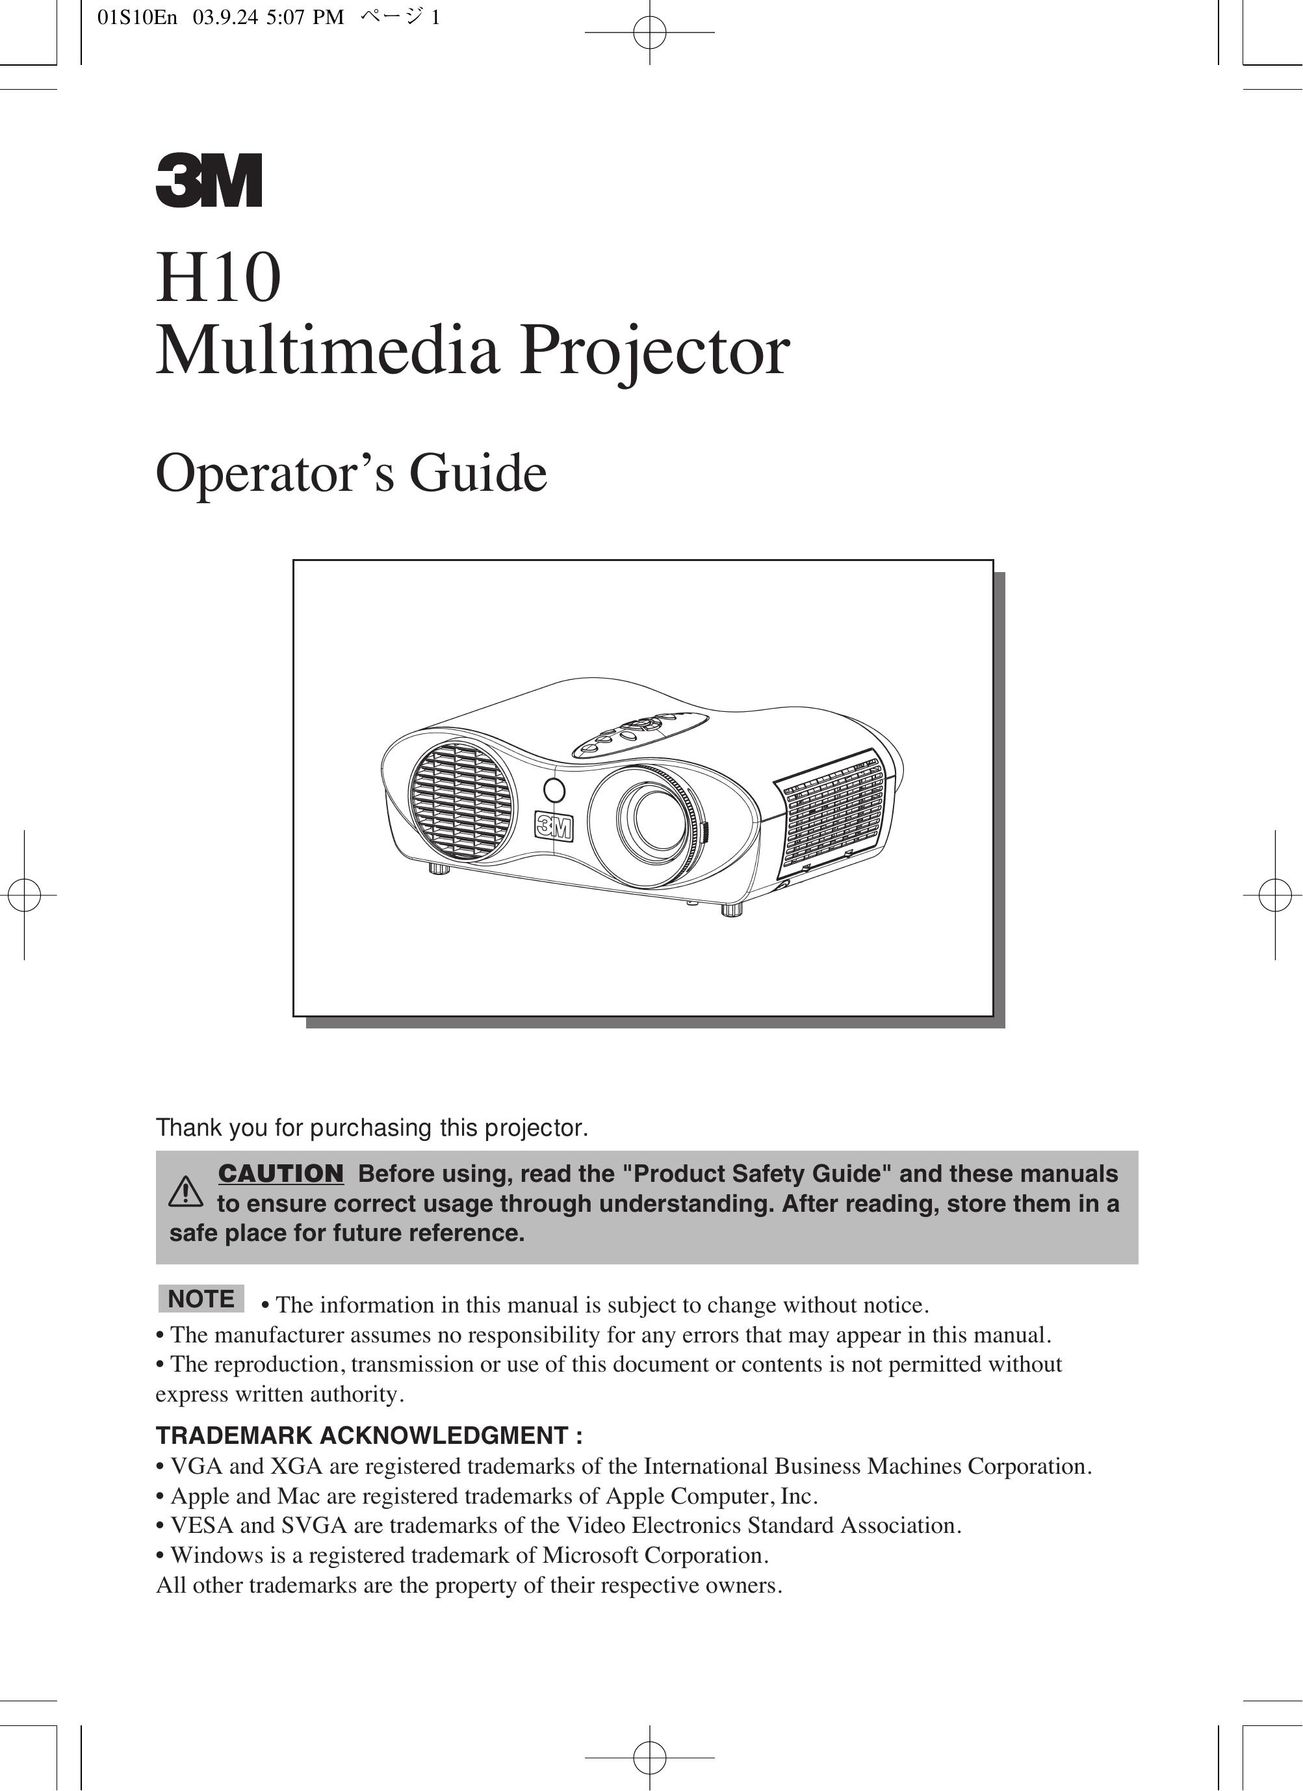 3M H10 Projector User Manual